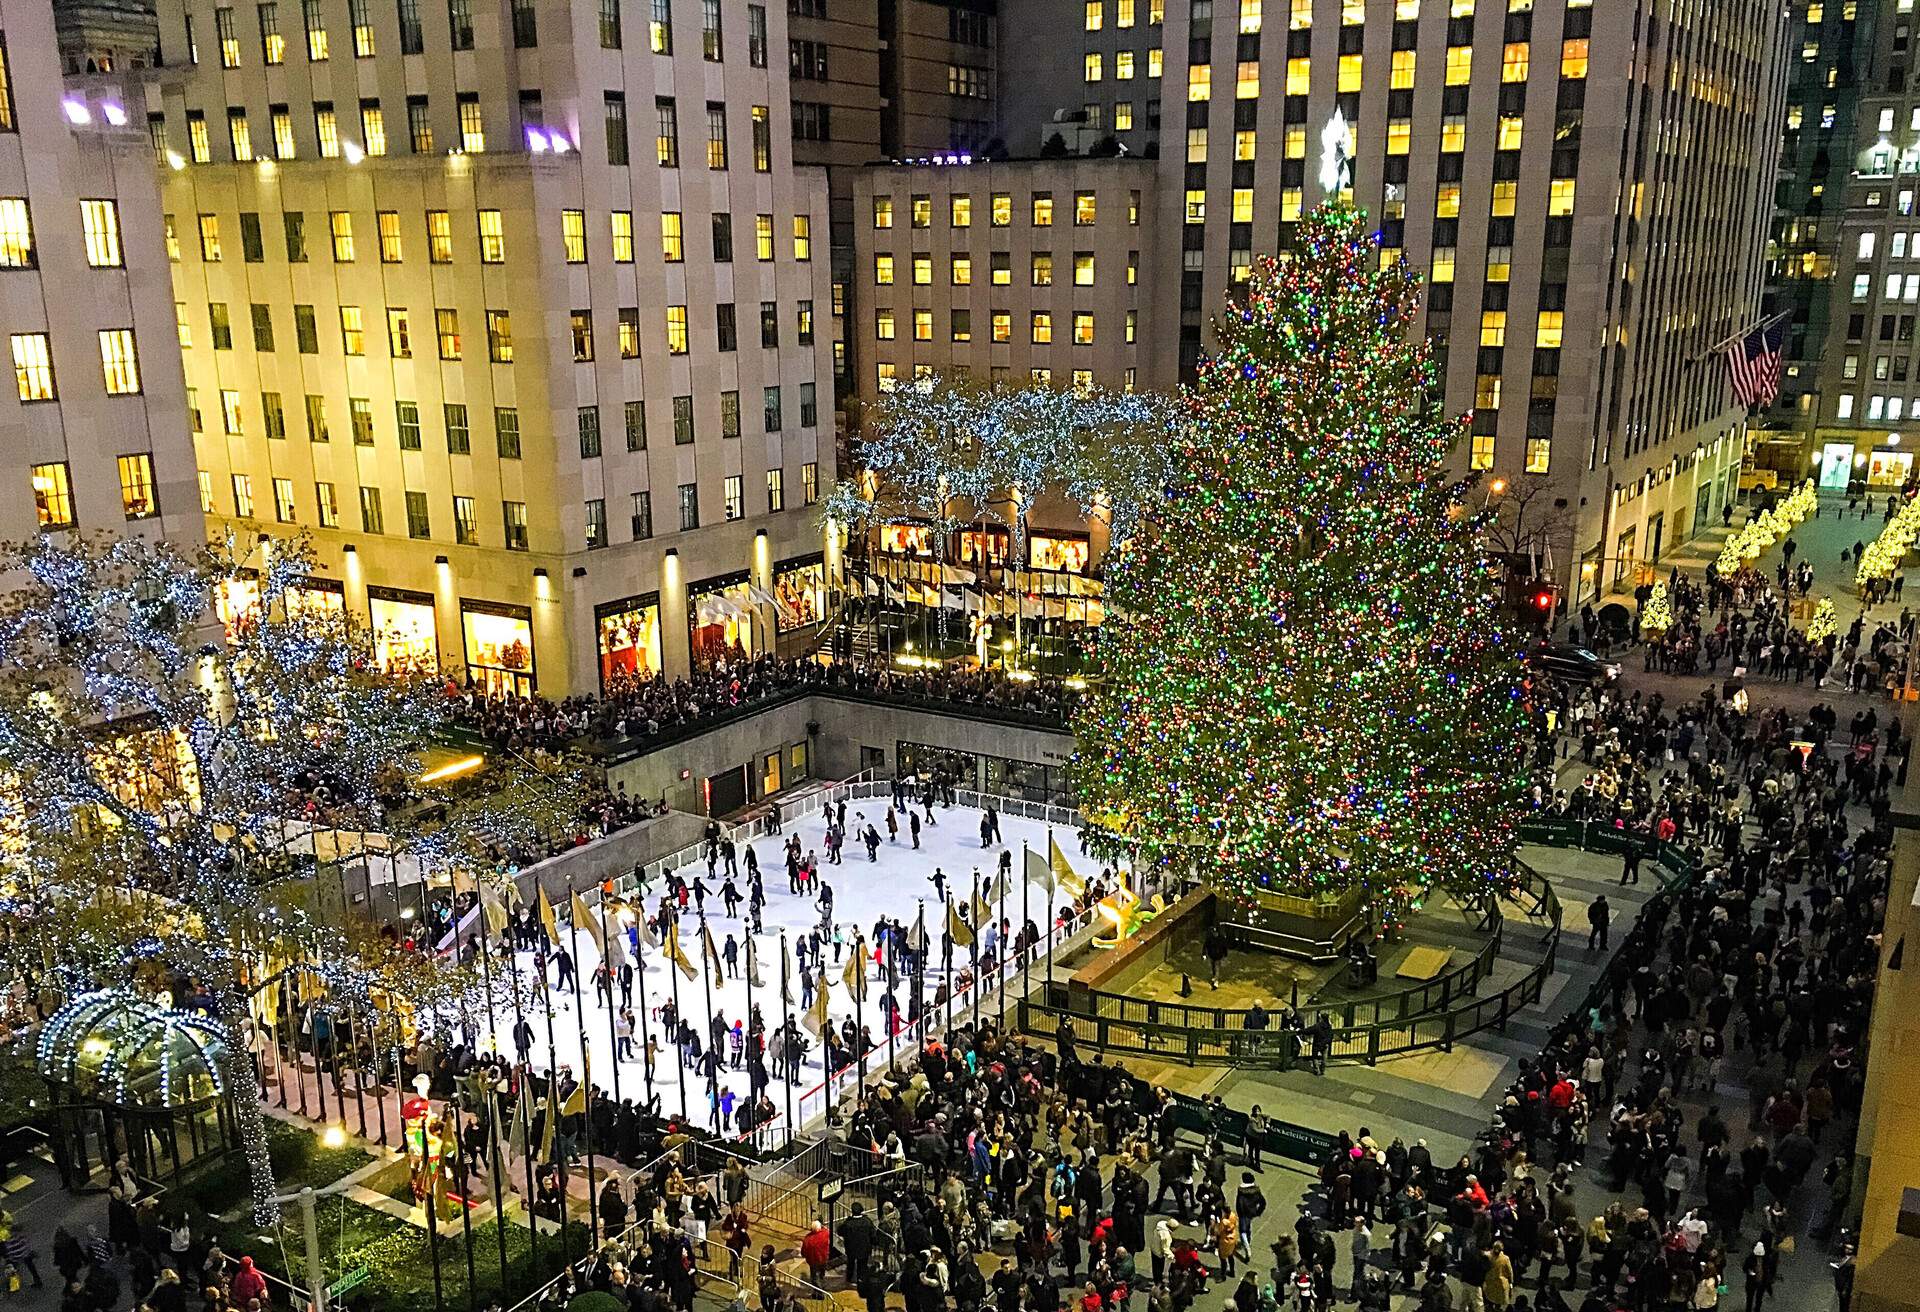 The Rockefeller Centre crowded with people during the holidays with its iconic Christmas tree lit up at night.